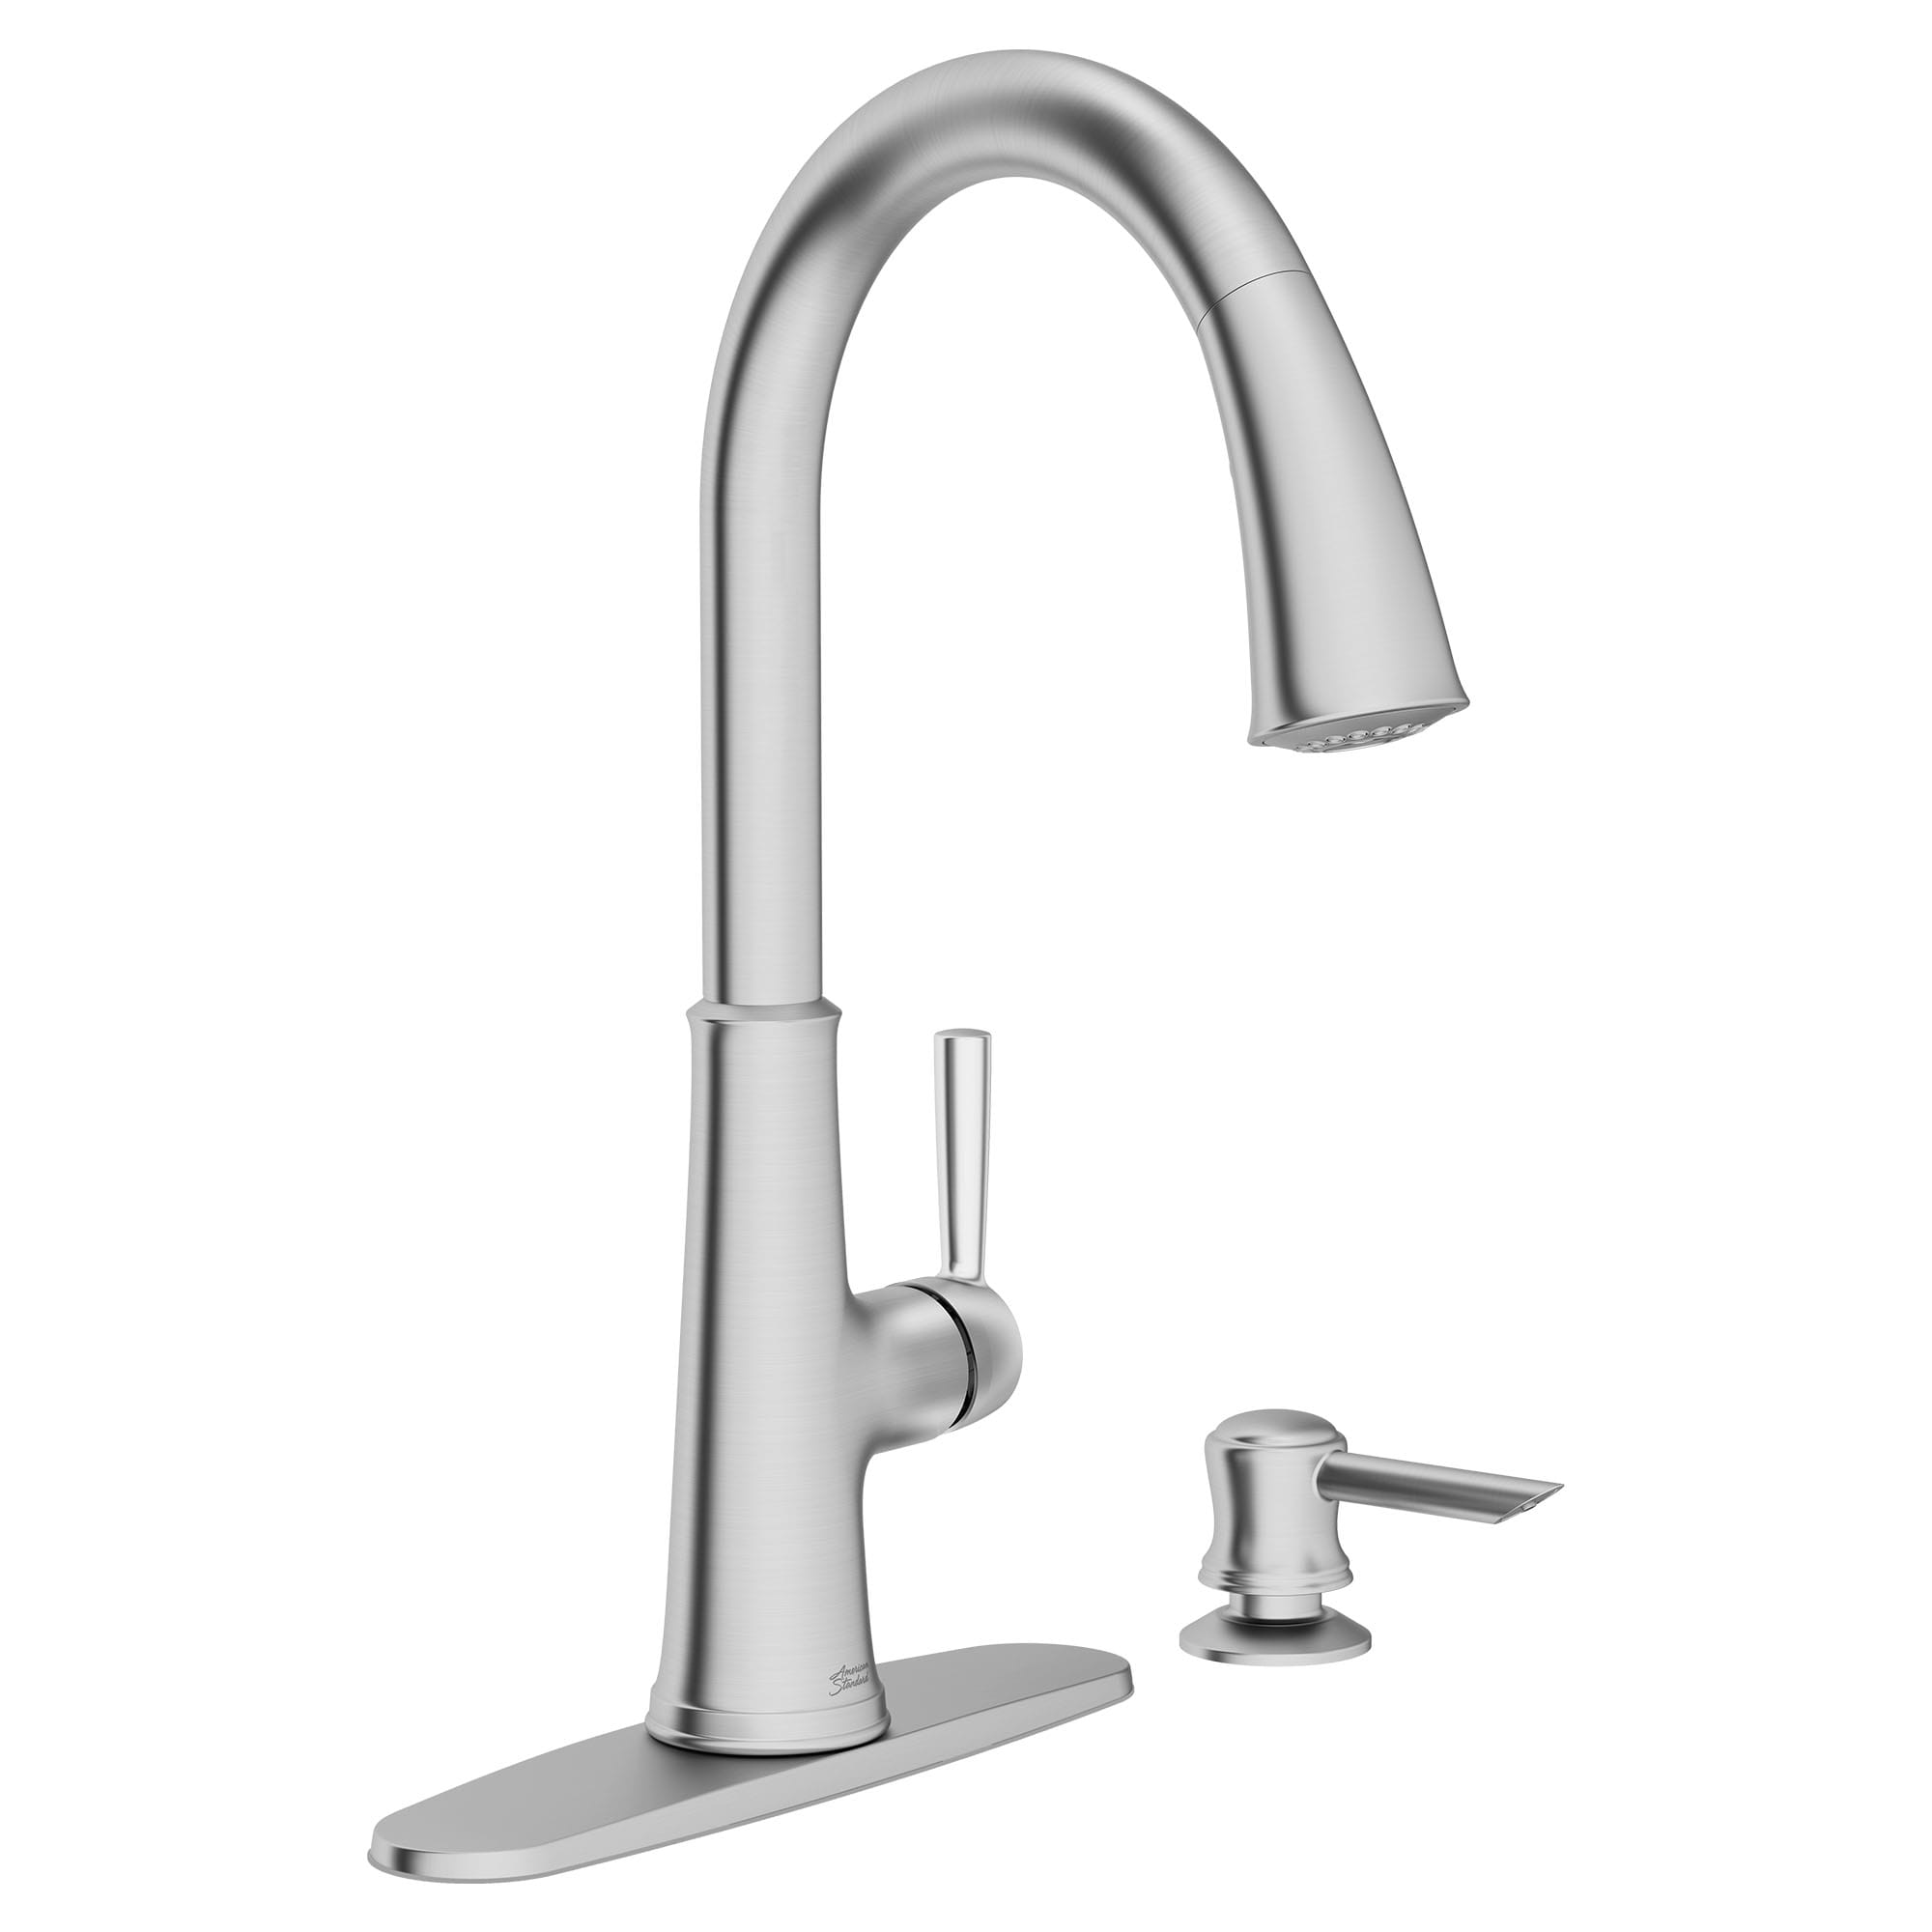 Maven Series 9319300.075 Pull-Down Kitchen Faucet with Soap Dispenser, 1.8 gpm, 1-Faucet Handle